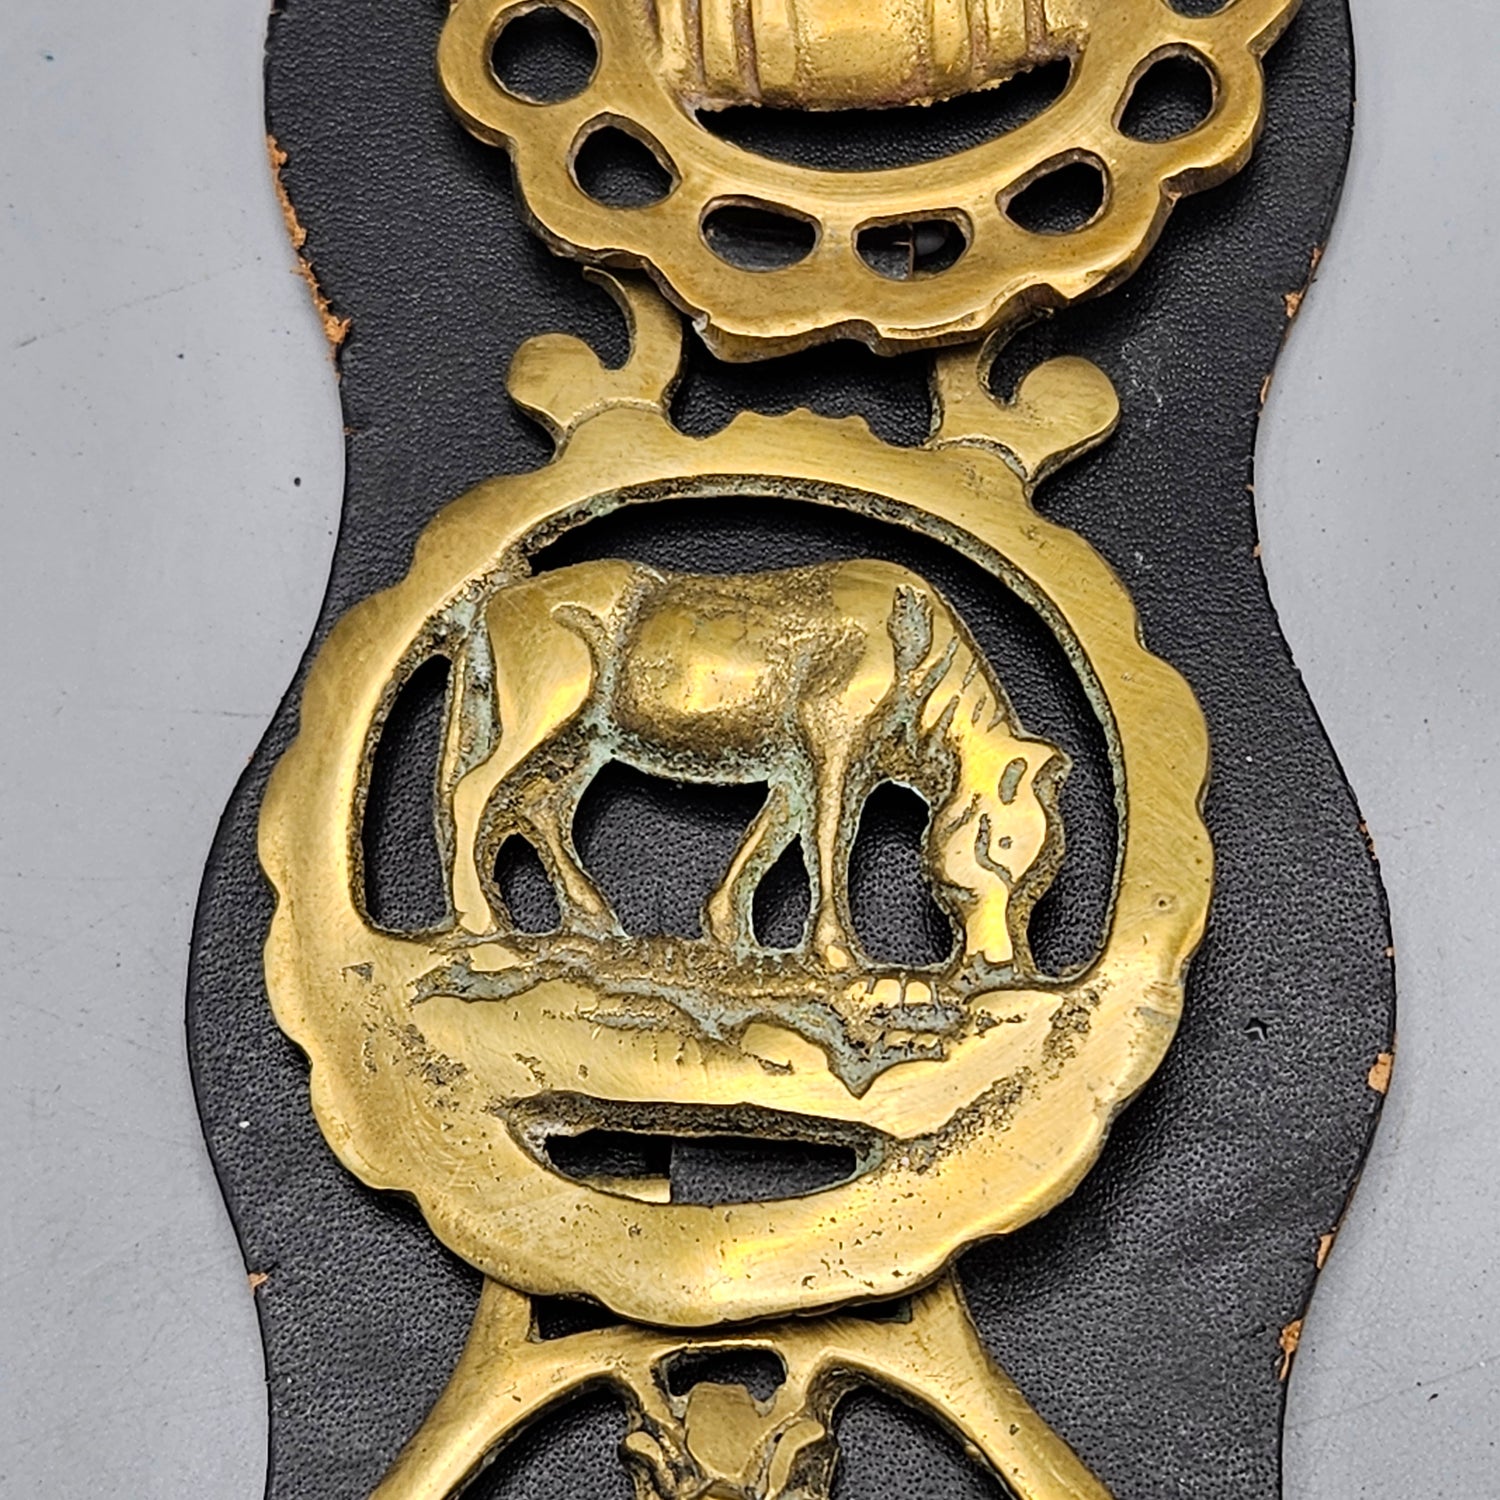 ANTIQUE ENGLISH HORSE BRASS MEDALLION WITH A WORK HORSE